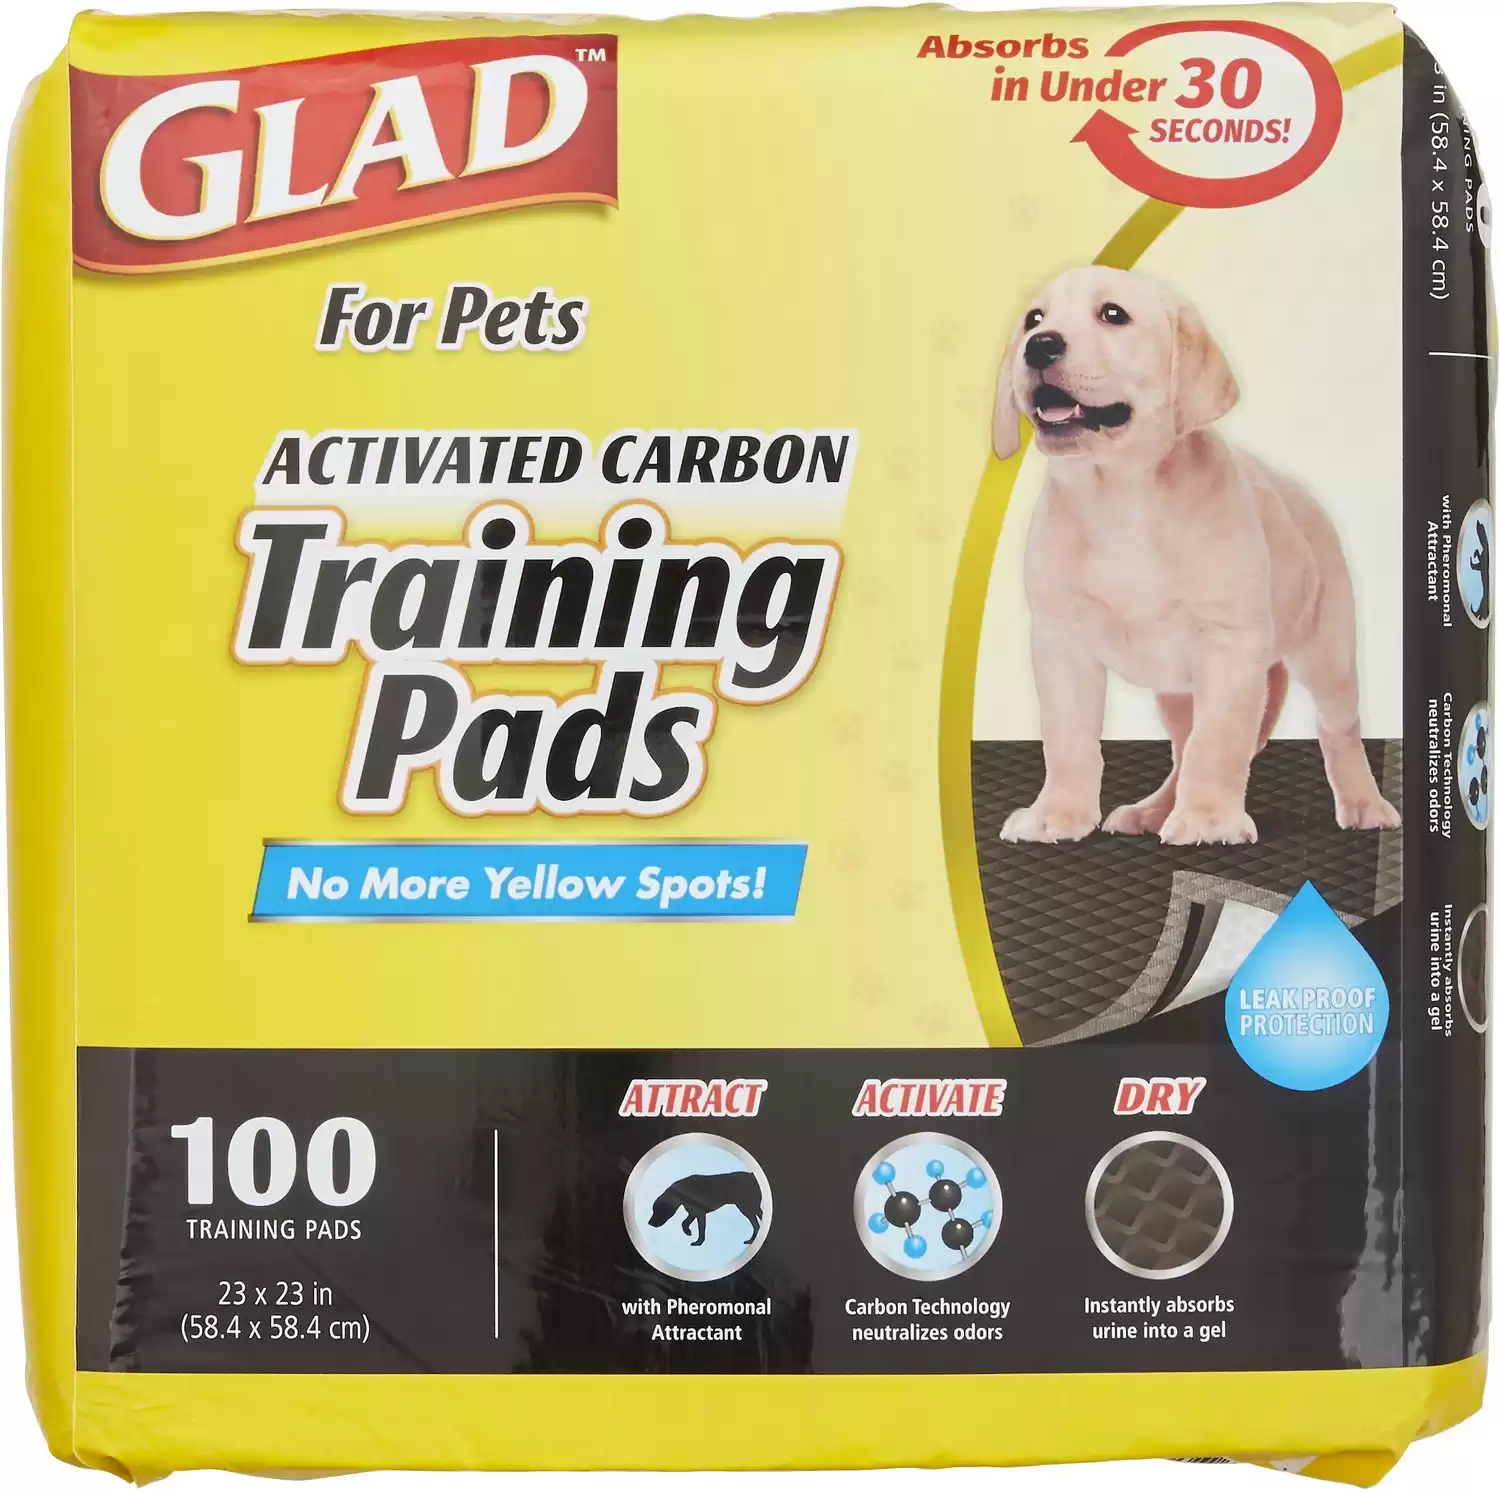 Glad For Pets Activated Carbon Dog Training Pads, 23" x 23"